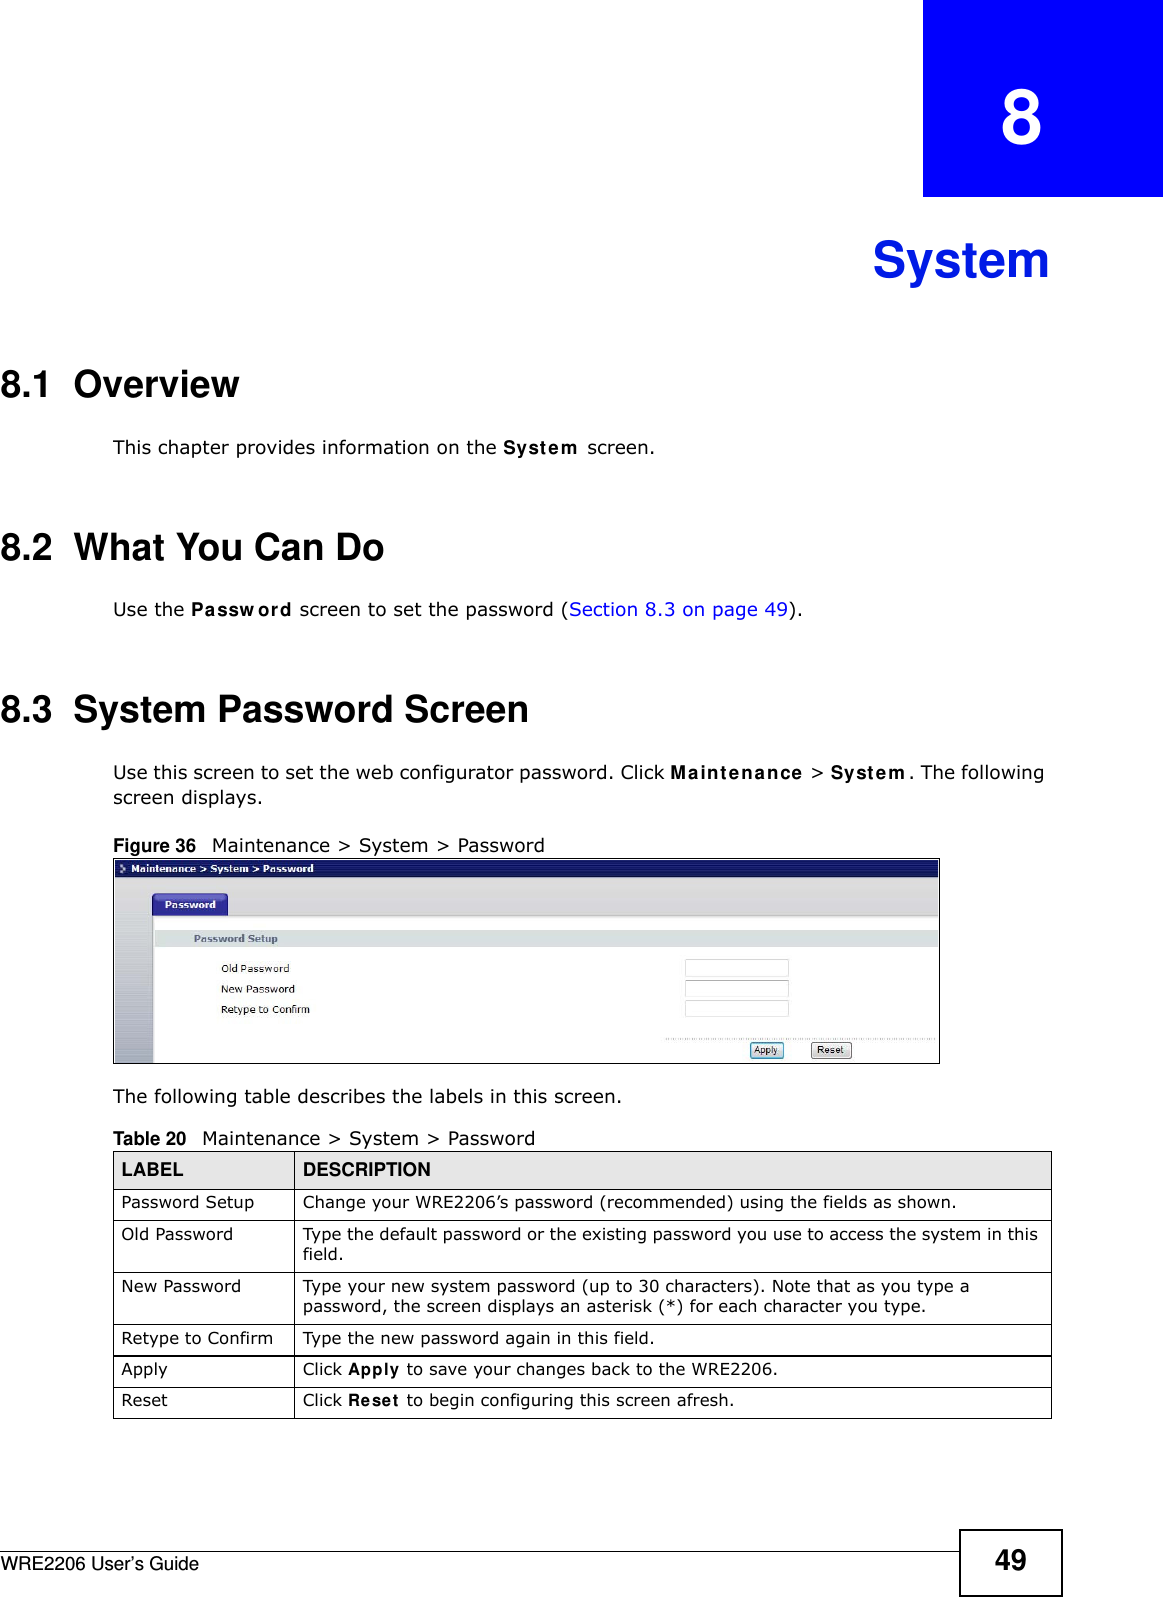 WRE2206 User’s Guide 49CHAPTER   8System8.1  OverviewThis chapter provides information on the Syste m  screen. 8.2  What You Can DoUse the Pa ssw ord screen to set the password (Section 8.3 on page 49).8.3  System Password Screen Use this screen to set the web configurator password. Click M a in t ena nce  &gt; Syst e m . The following screen displays.Figure 36   Maintenance &gt; System &gt; Password The following table describes the labels in this screen.Table 20   Maintenance &gt; System &gt; PasswordLABEL DESCRIPTIONPassword Setup Change your WRE2206’s password (recommended) using the fields as shown.Old Password Type the default password or the existing password you use to access the system in this field.New Password Type your new system password (up to 30 characters). Note that as you type a password, the screen displays an asterisk (*) for each character you type.Retype to Confirm Type the new password again in this field.Apply Click Apply to save your changes back to the WRE2206.Reset Click Re se t  to begin configuring this screen afresh.